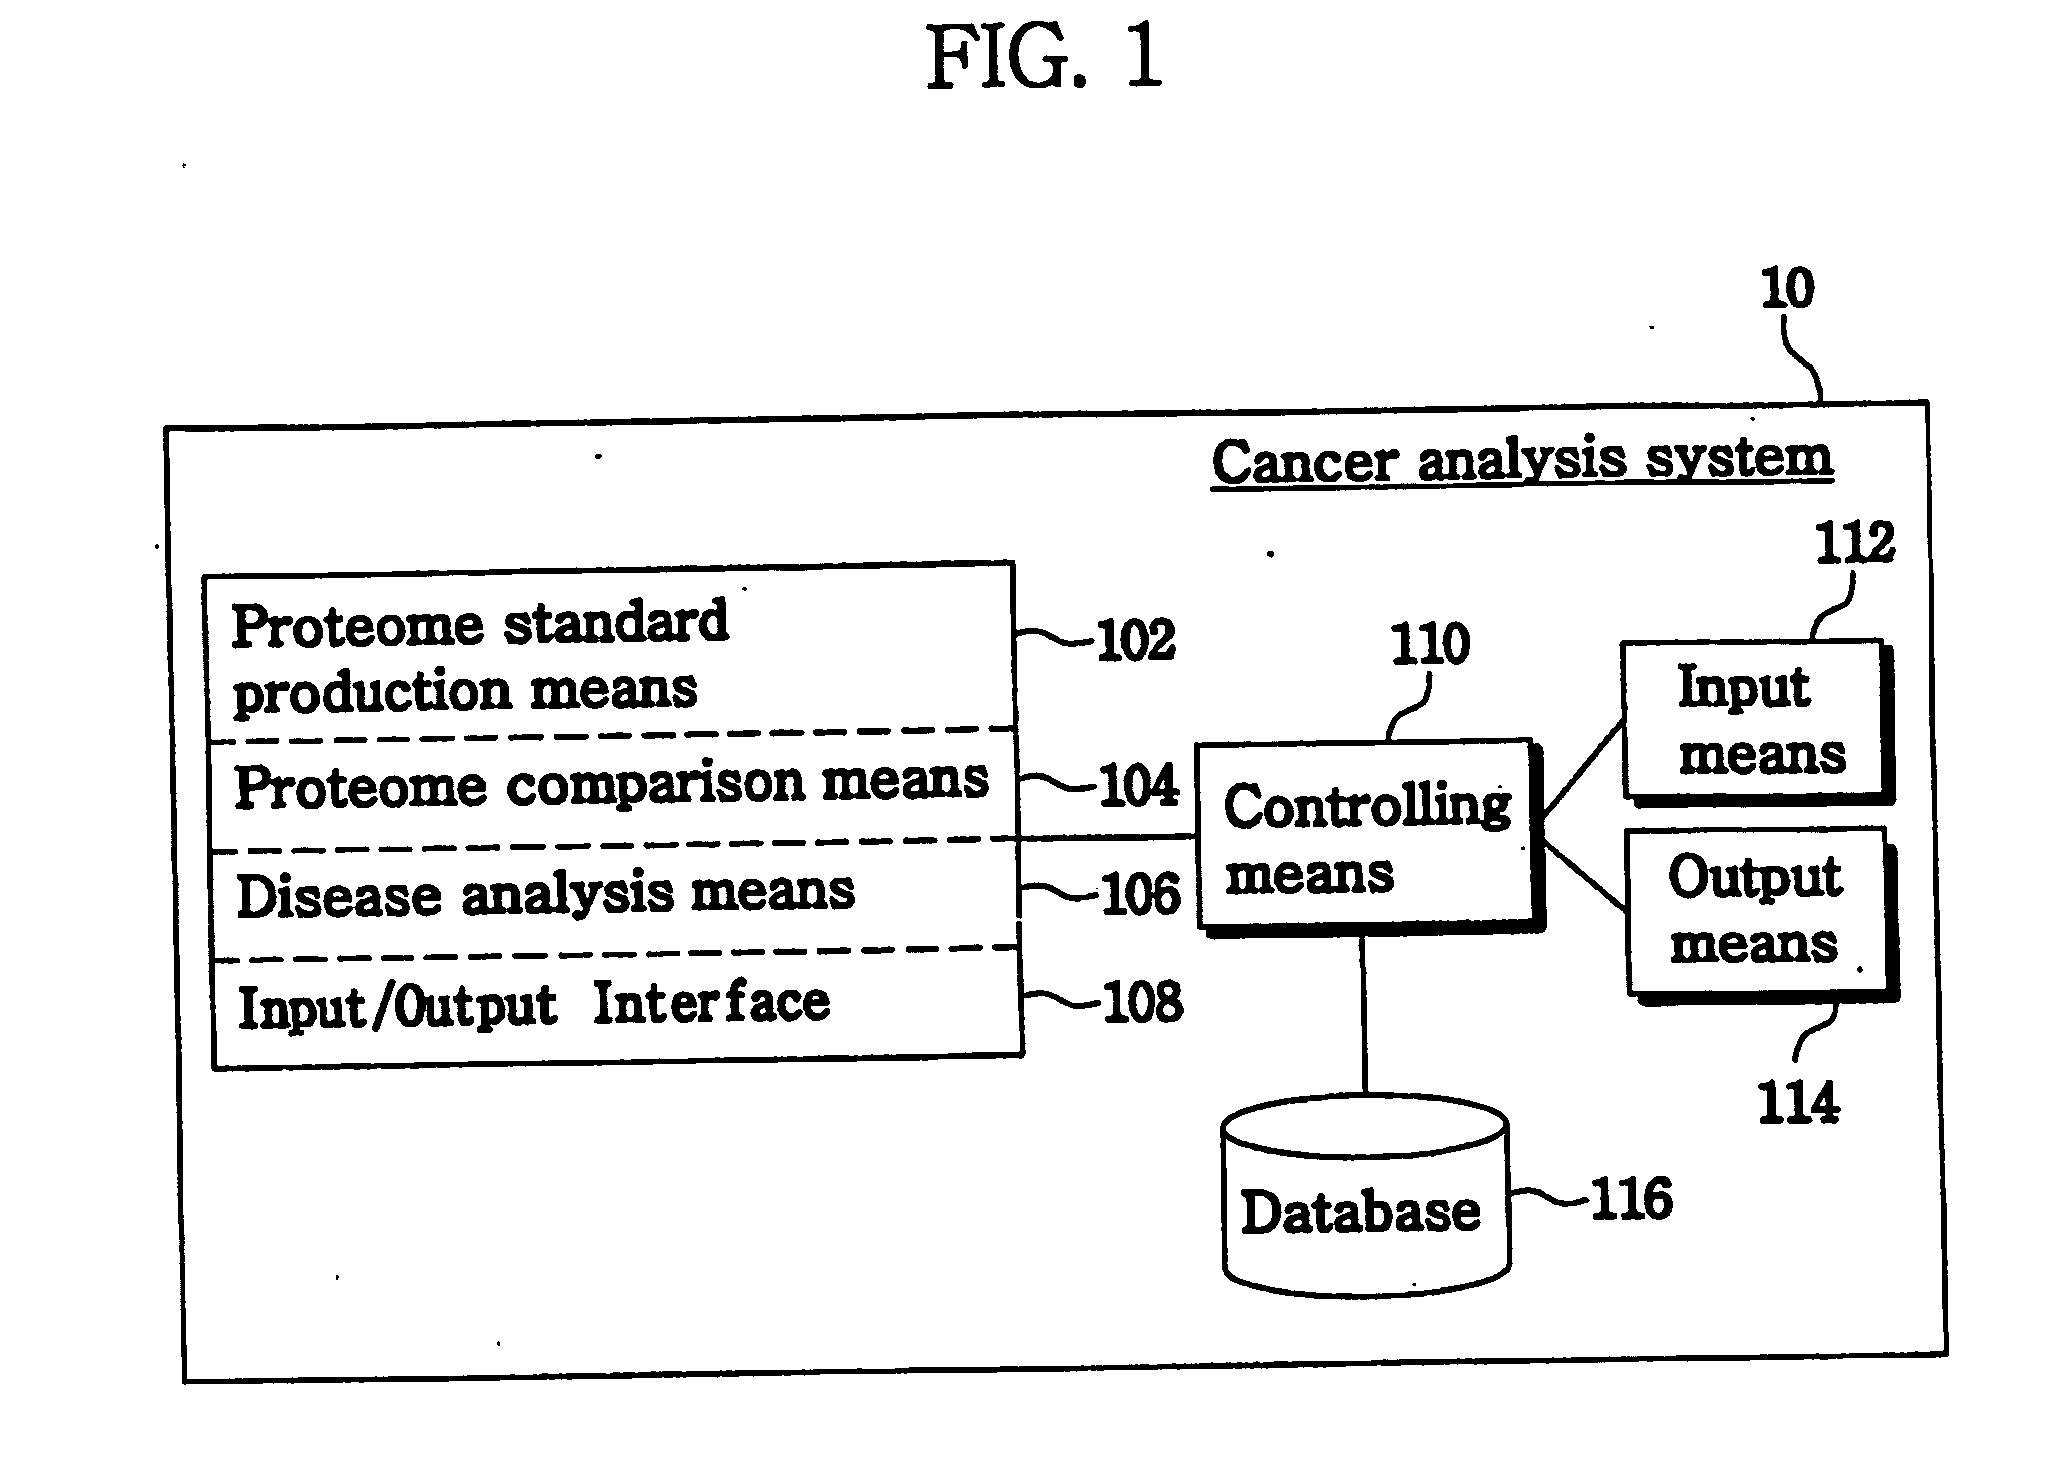 Method and system for analysis of cancer biomarkers using proteome image mining